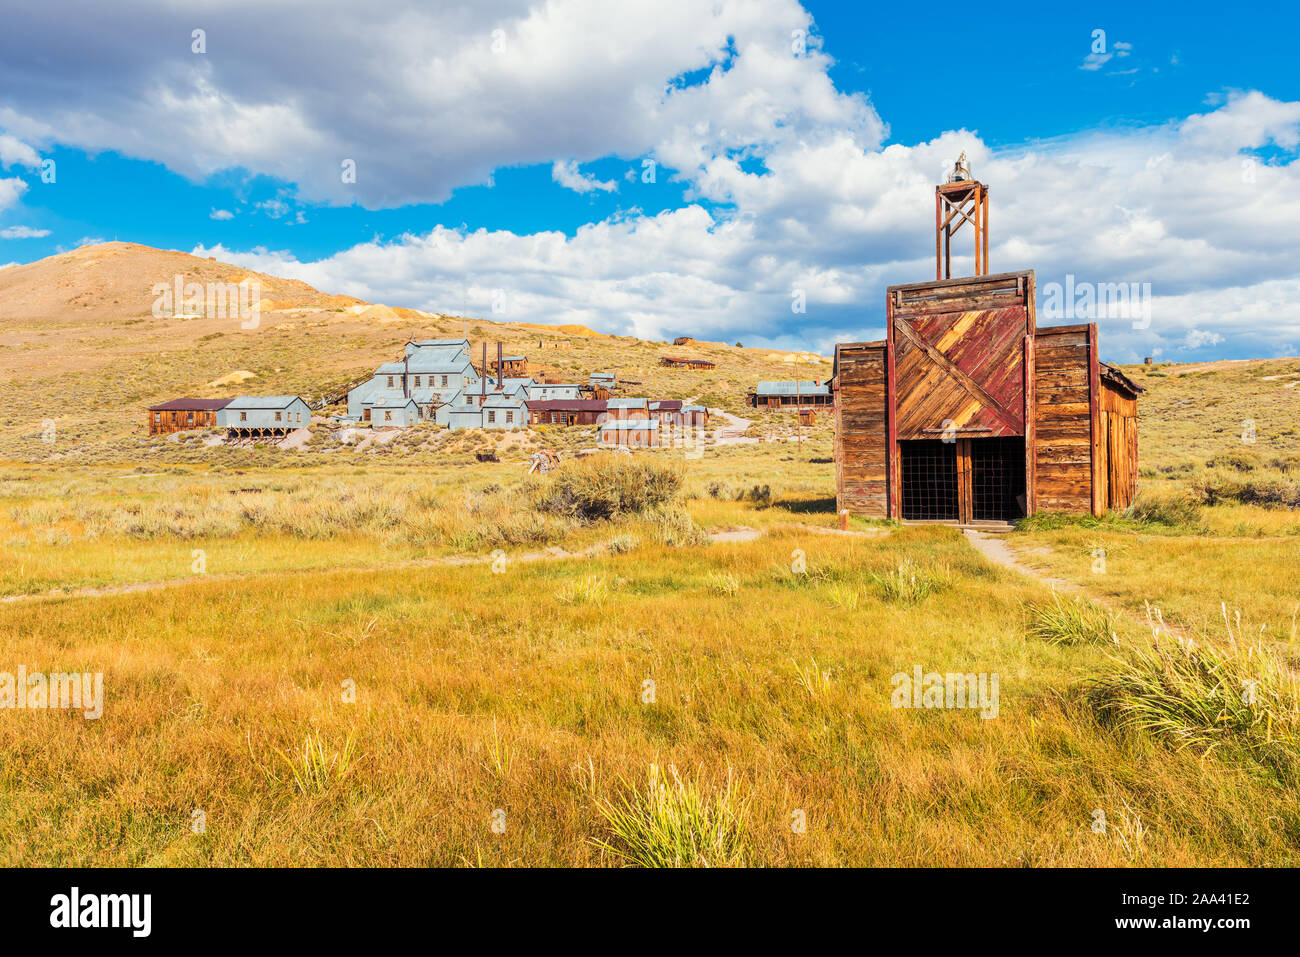 Firehouse in the Ghost town of Bodie California USA Stock Photo